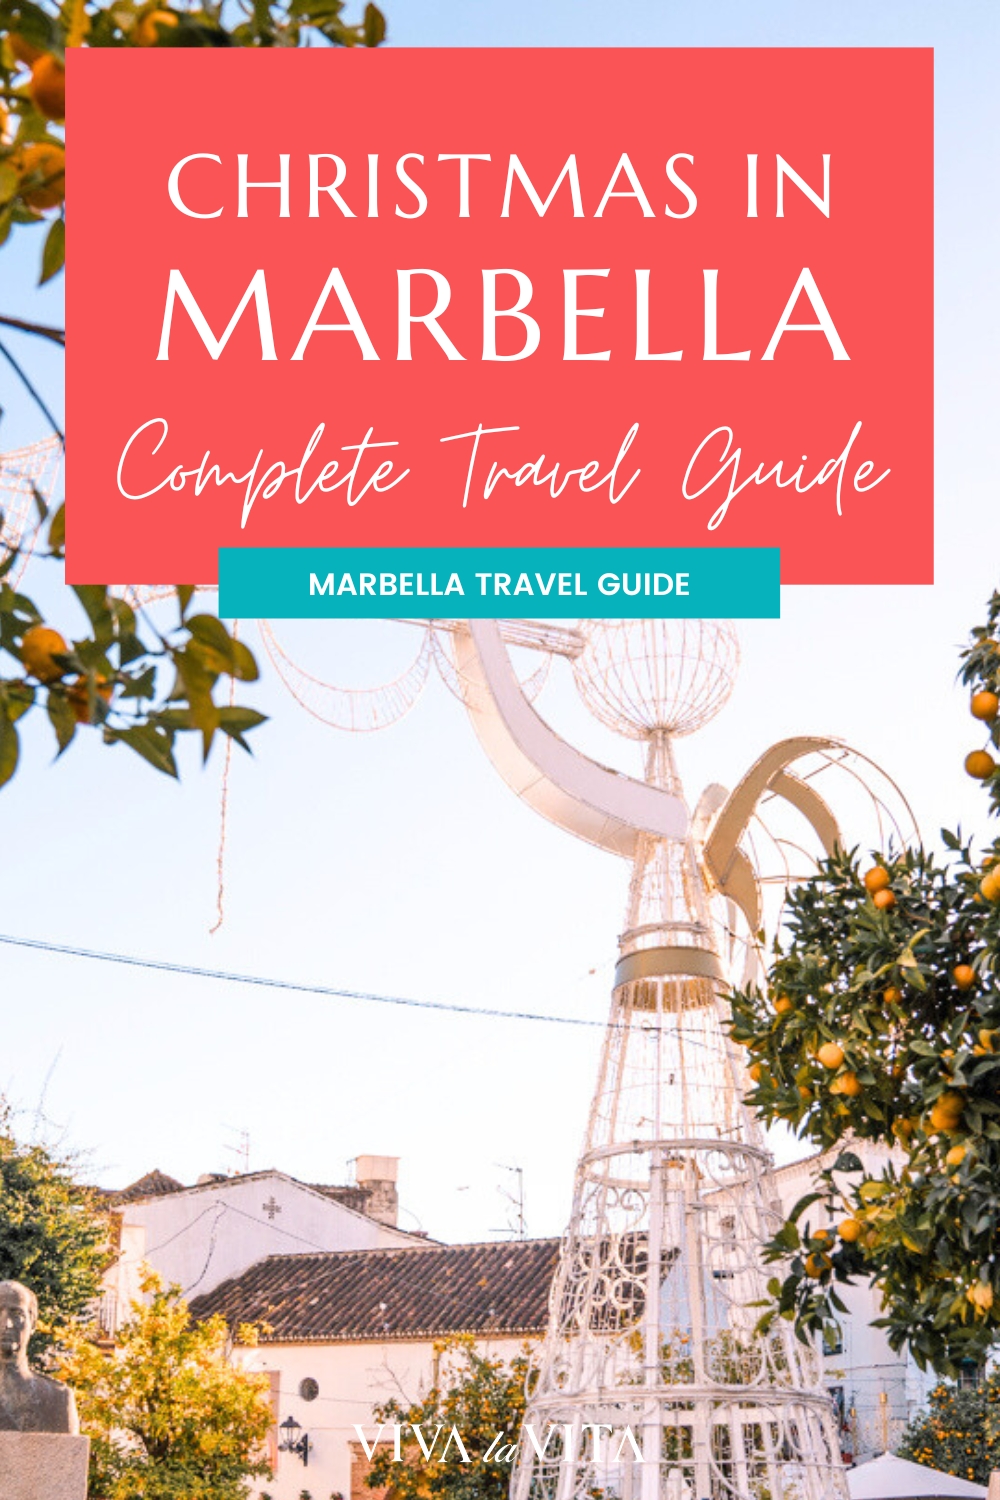 Pinterest image showing Christmas decorations at plaza de los naranjos in Marbella old town, with a headline that reads: Christmas in Marbella, Complete Travel Guide - Marbella Travel Guide